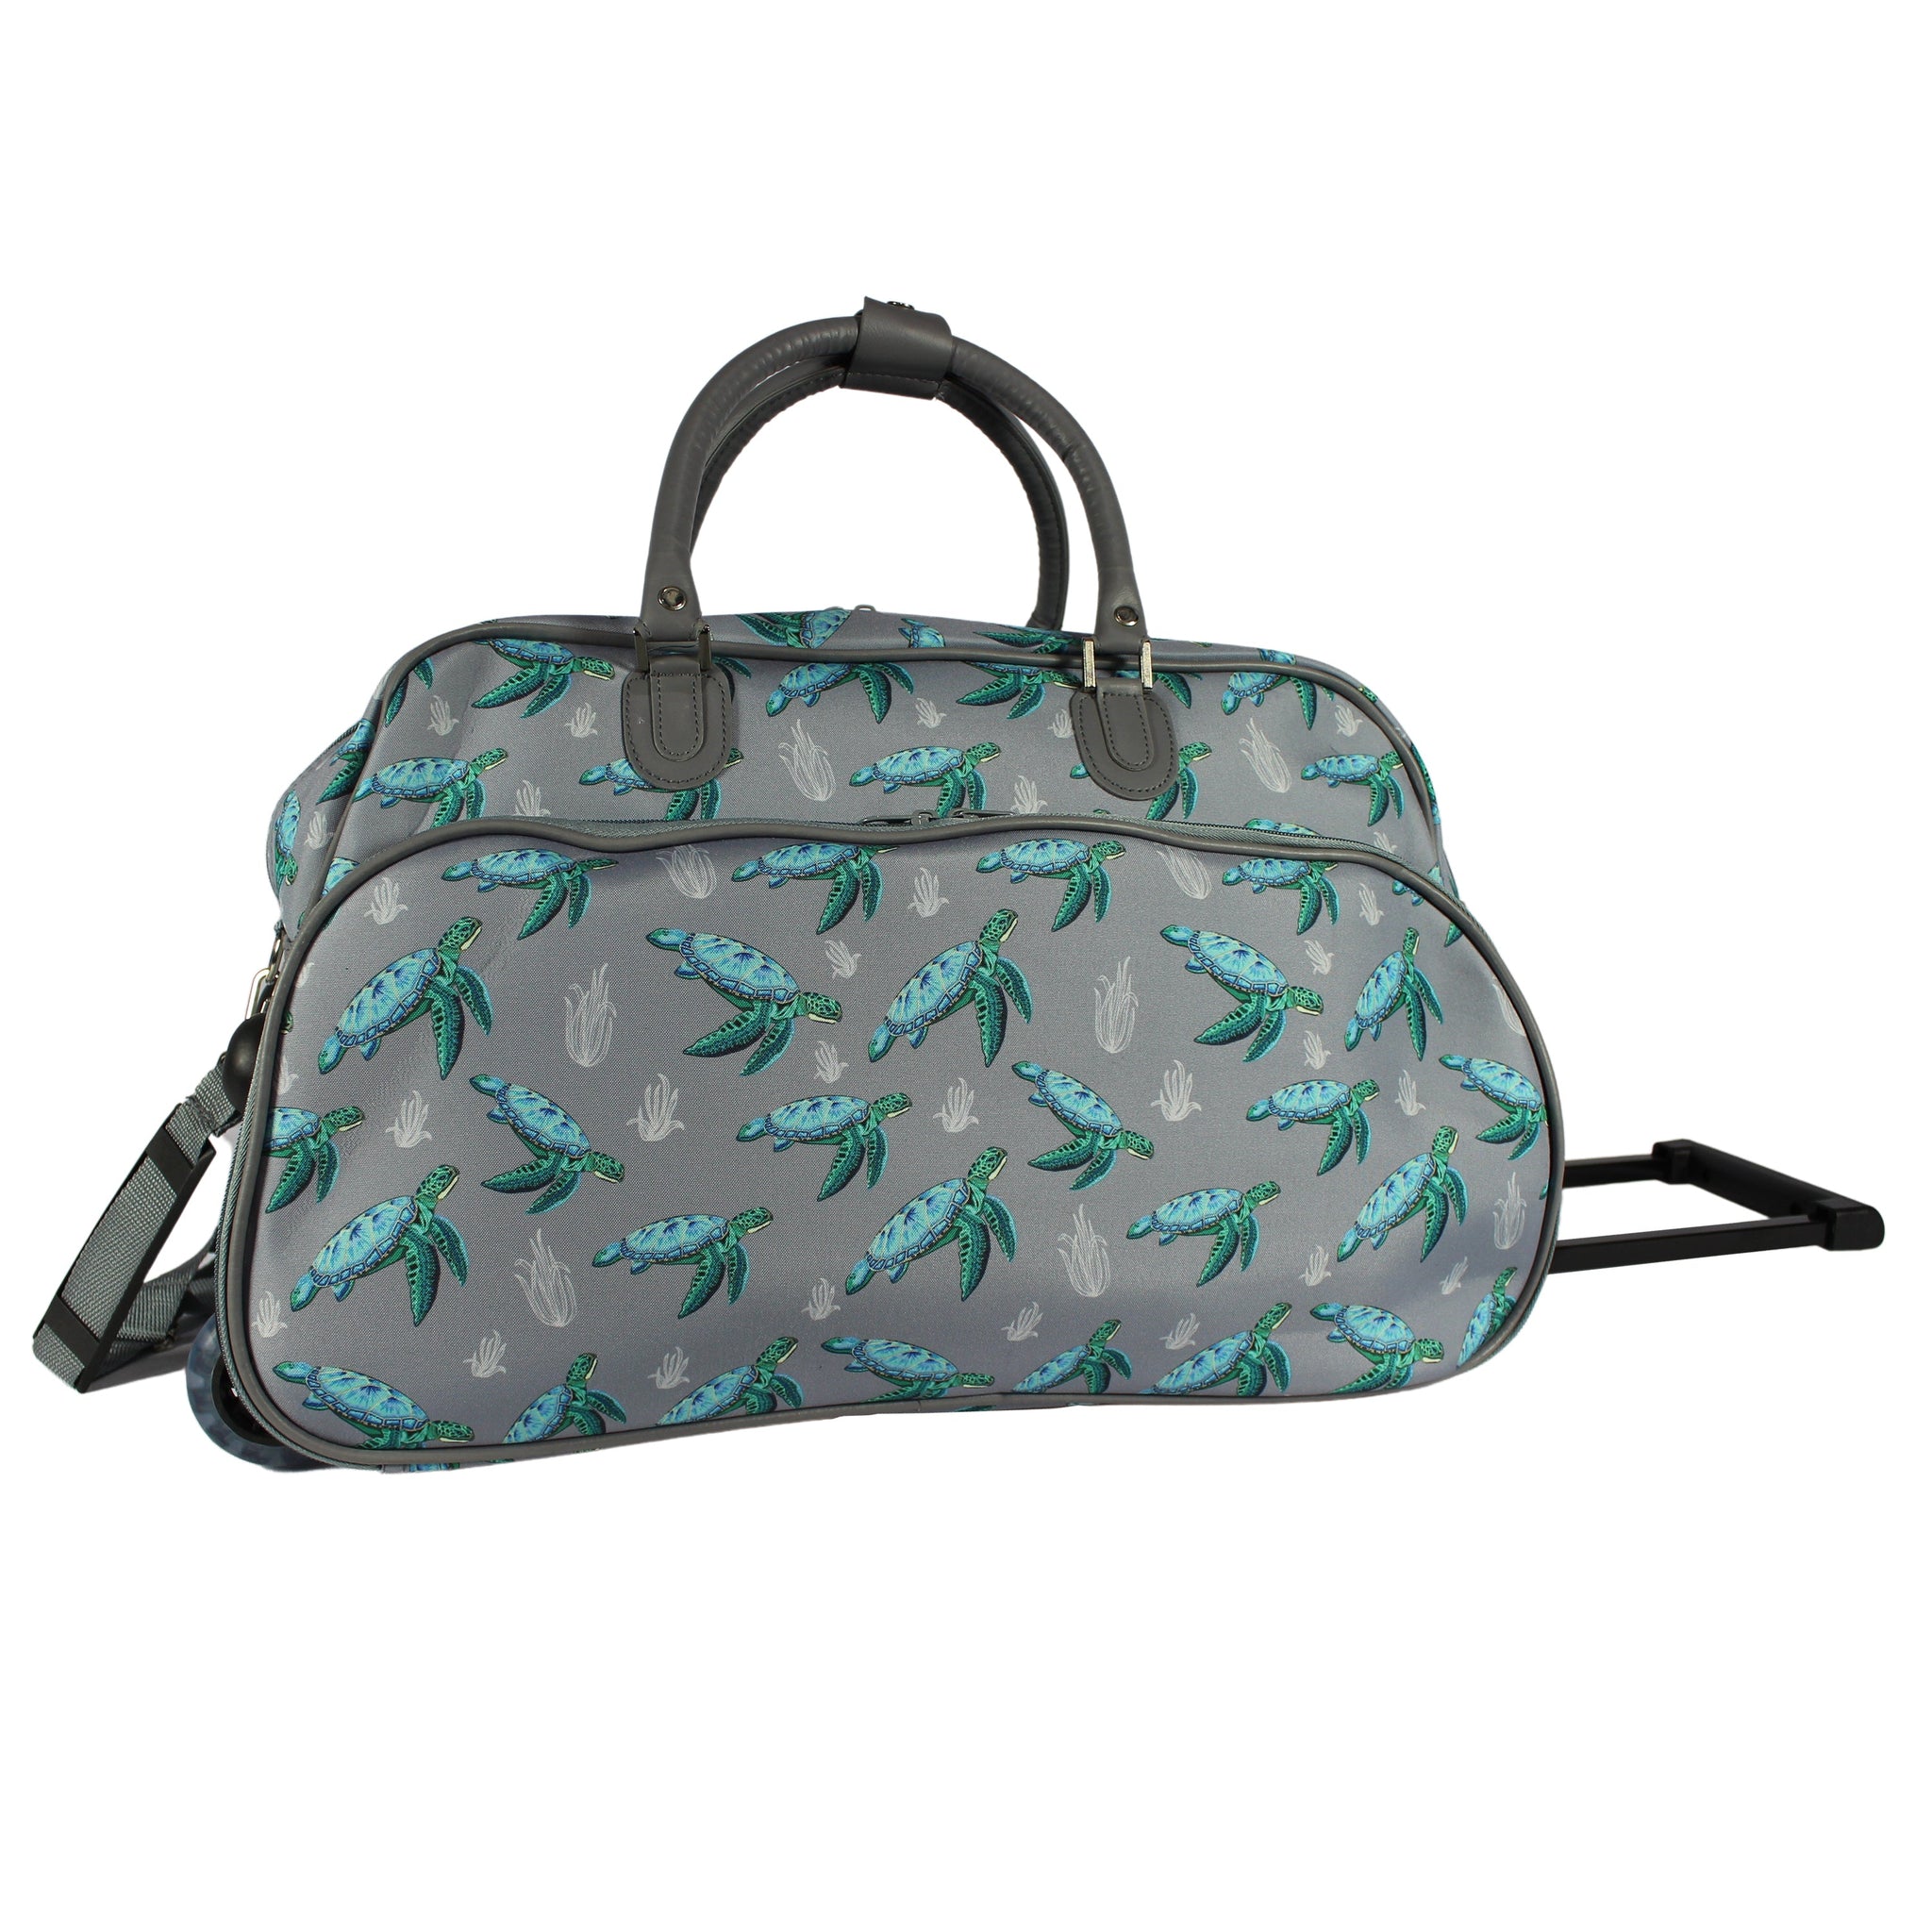 CalBags 21" Rolling Carry-On Duffel Bag - Turtles